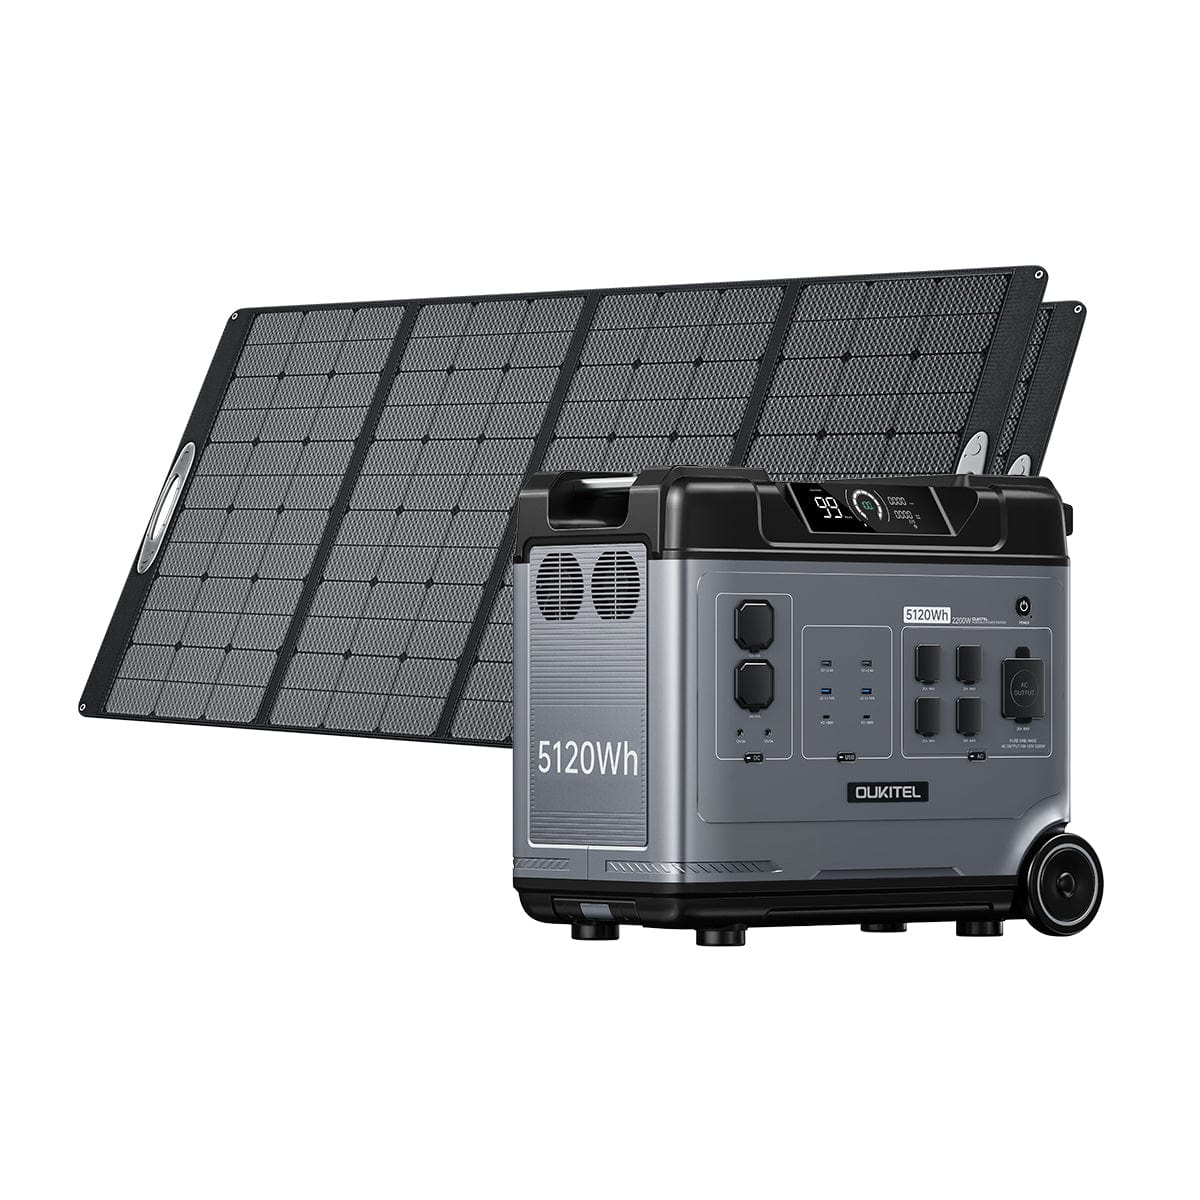 OUKITEL P5000 Solar Generator for Home with 400W Solar Panel Oukitel P5000+2*400W Portable Solar Panel Protabel Power Station